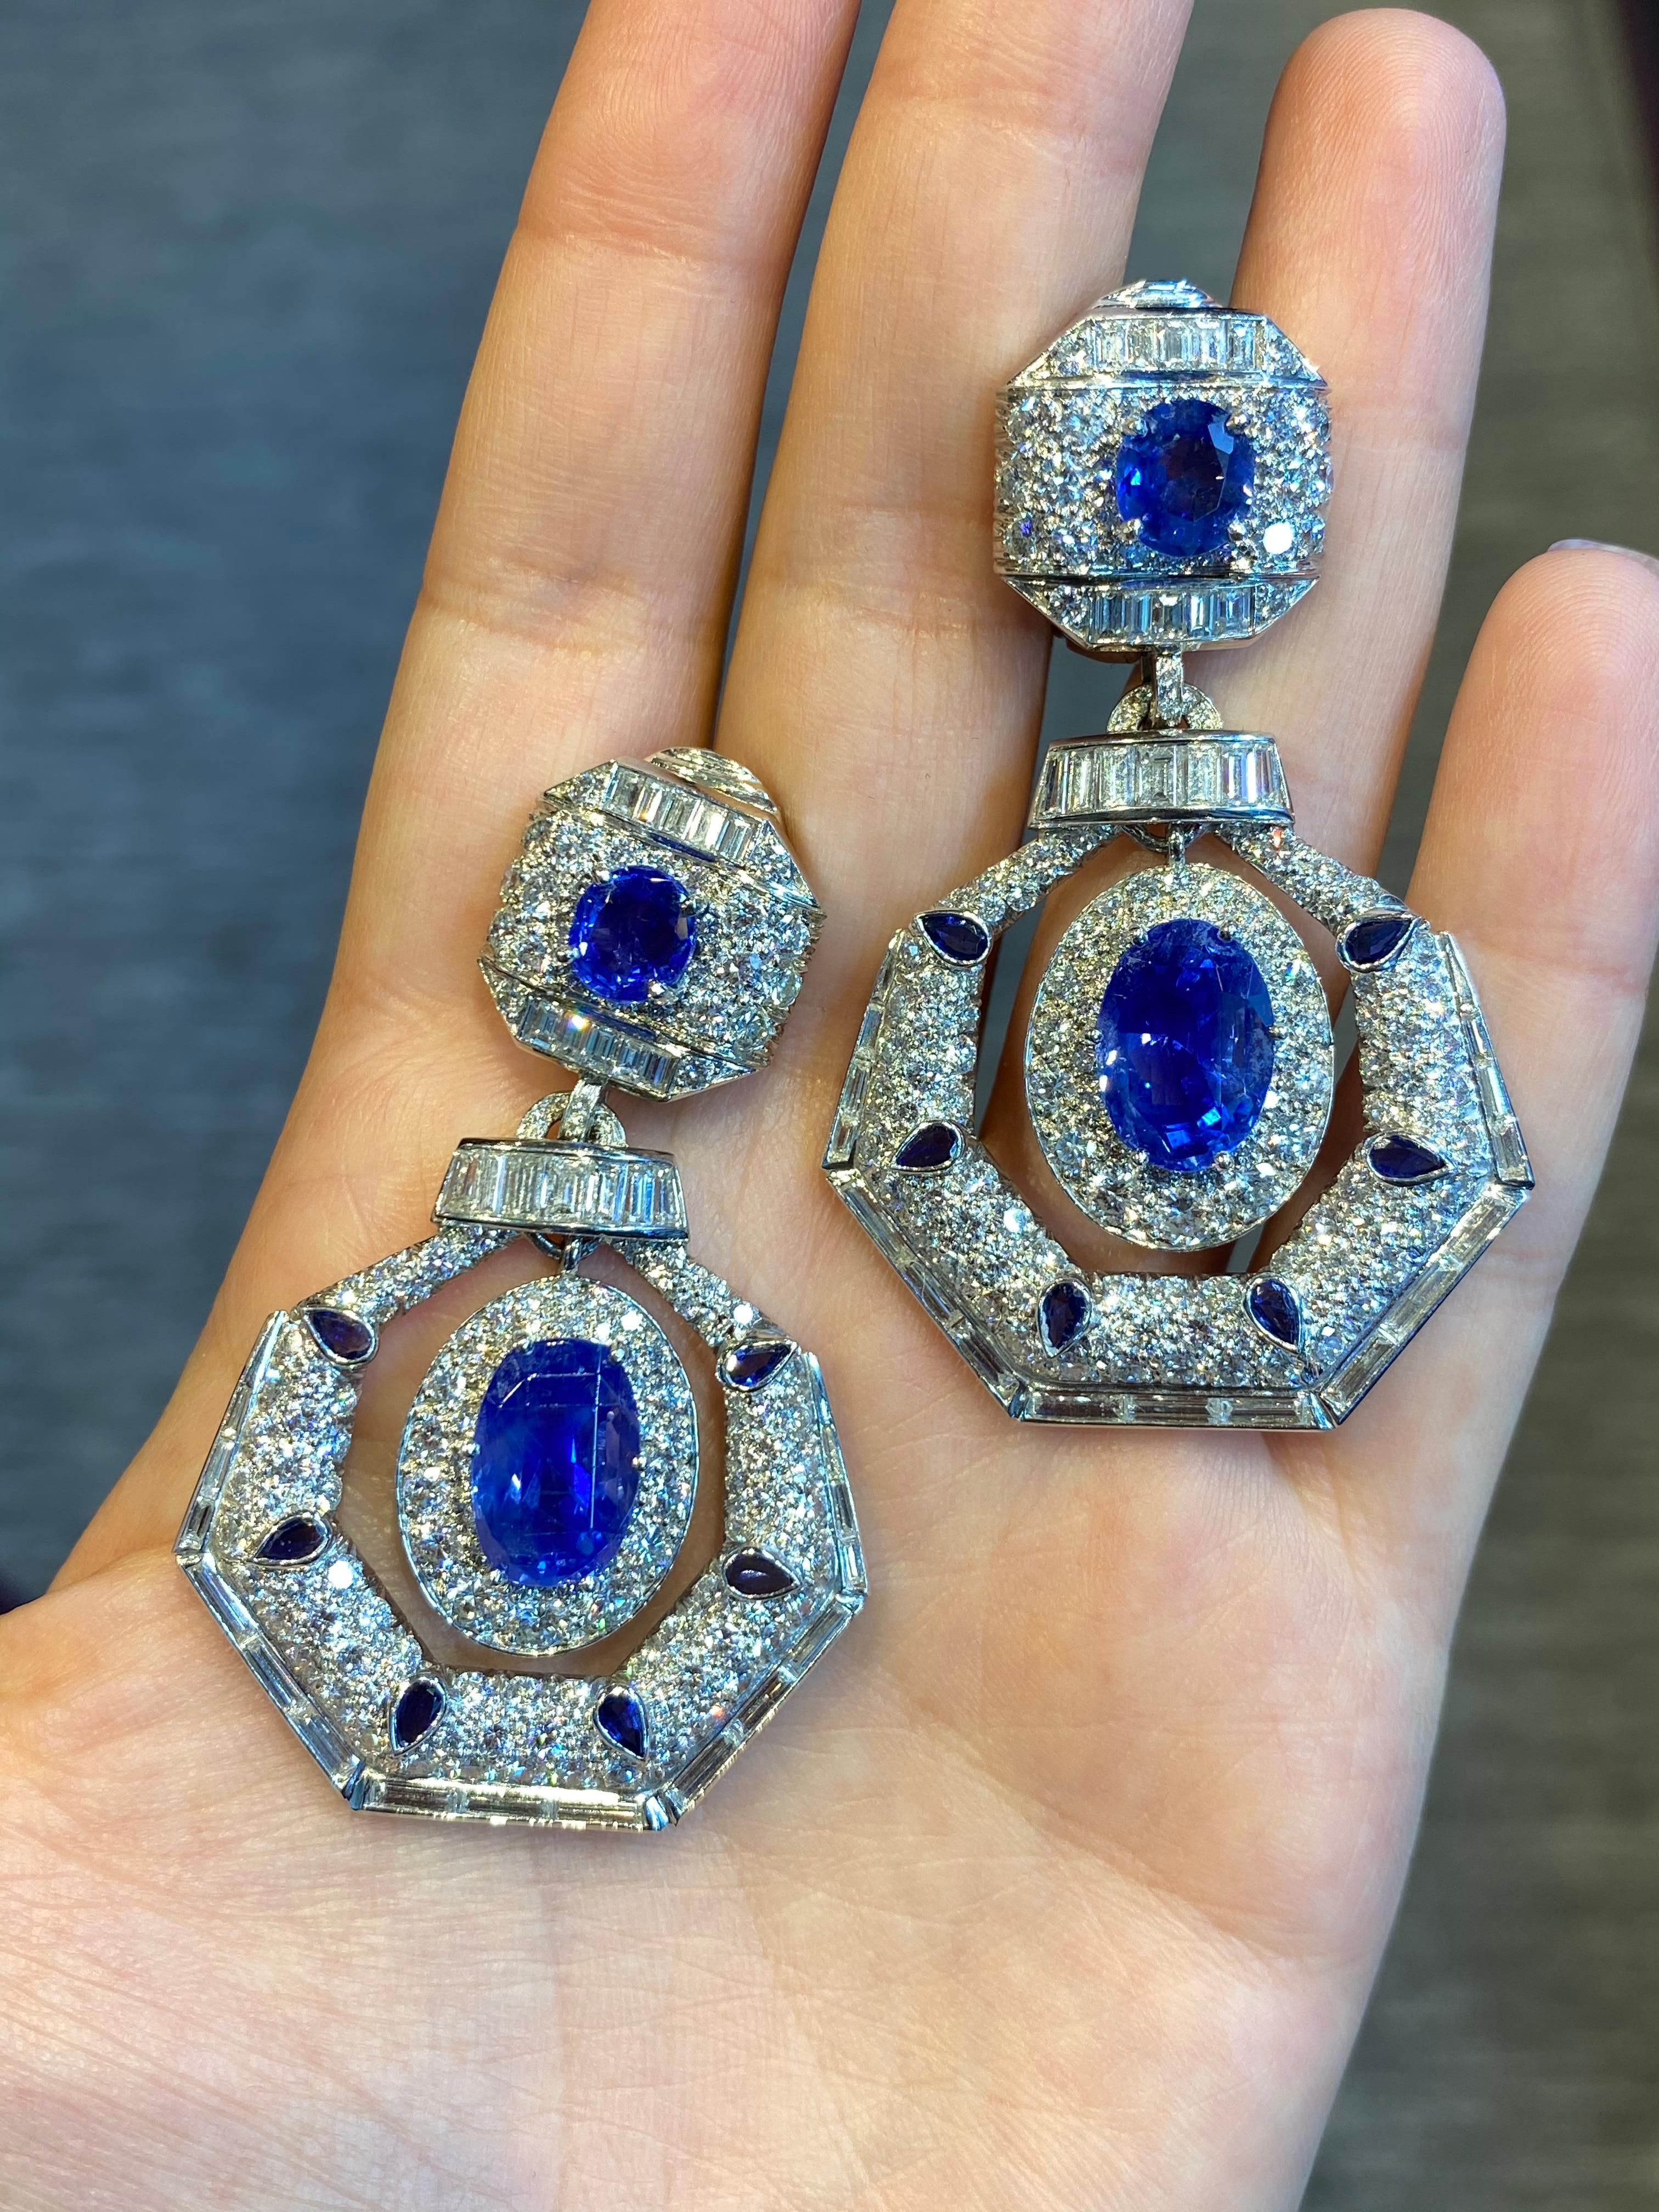 David Webb Ceylon Sapphire & Diamond Drop Earrings set in 18K White Gold & Platinum
Oval, round, and pear-shaped sapphires, round & baguette cut diamonds 
Back Type: Clip on
Length: 2